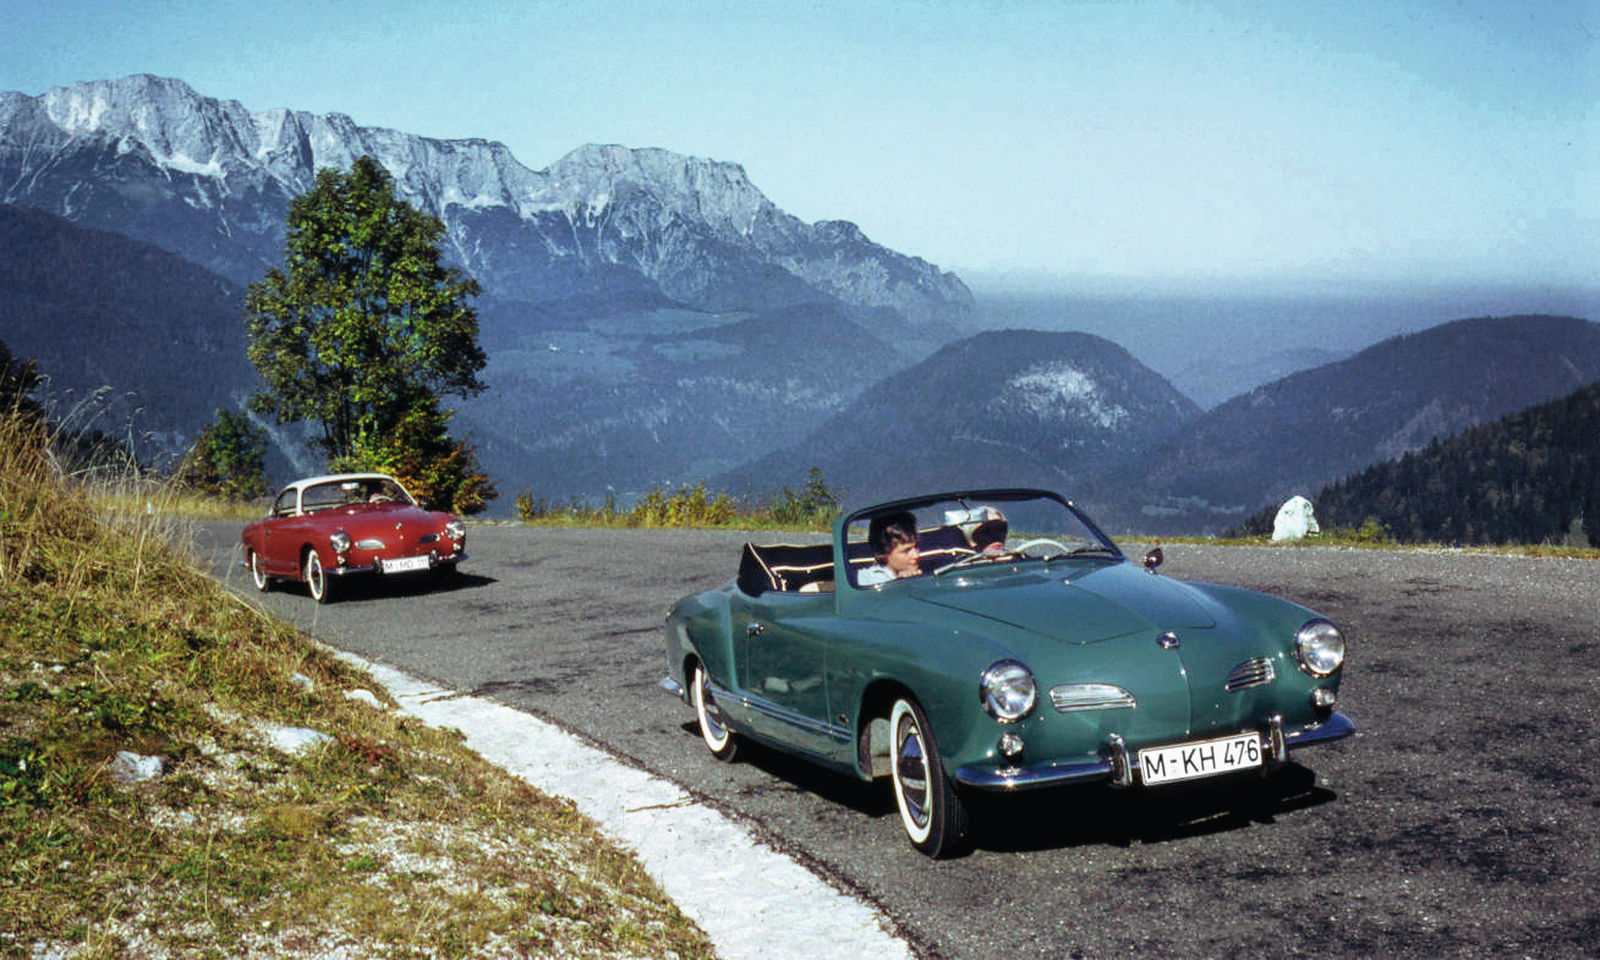 Two years after the coupé, the first Volkswagen Karmann Ghia Type 14 Cabriolet rolled off the production line in Osnabrück in November 1957